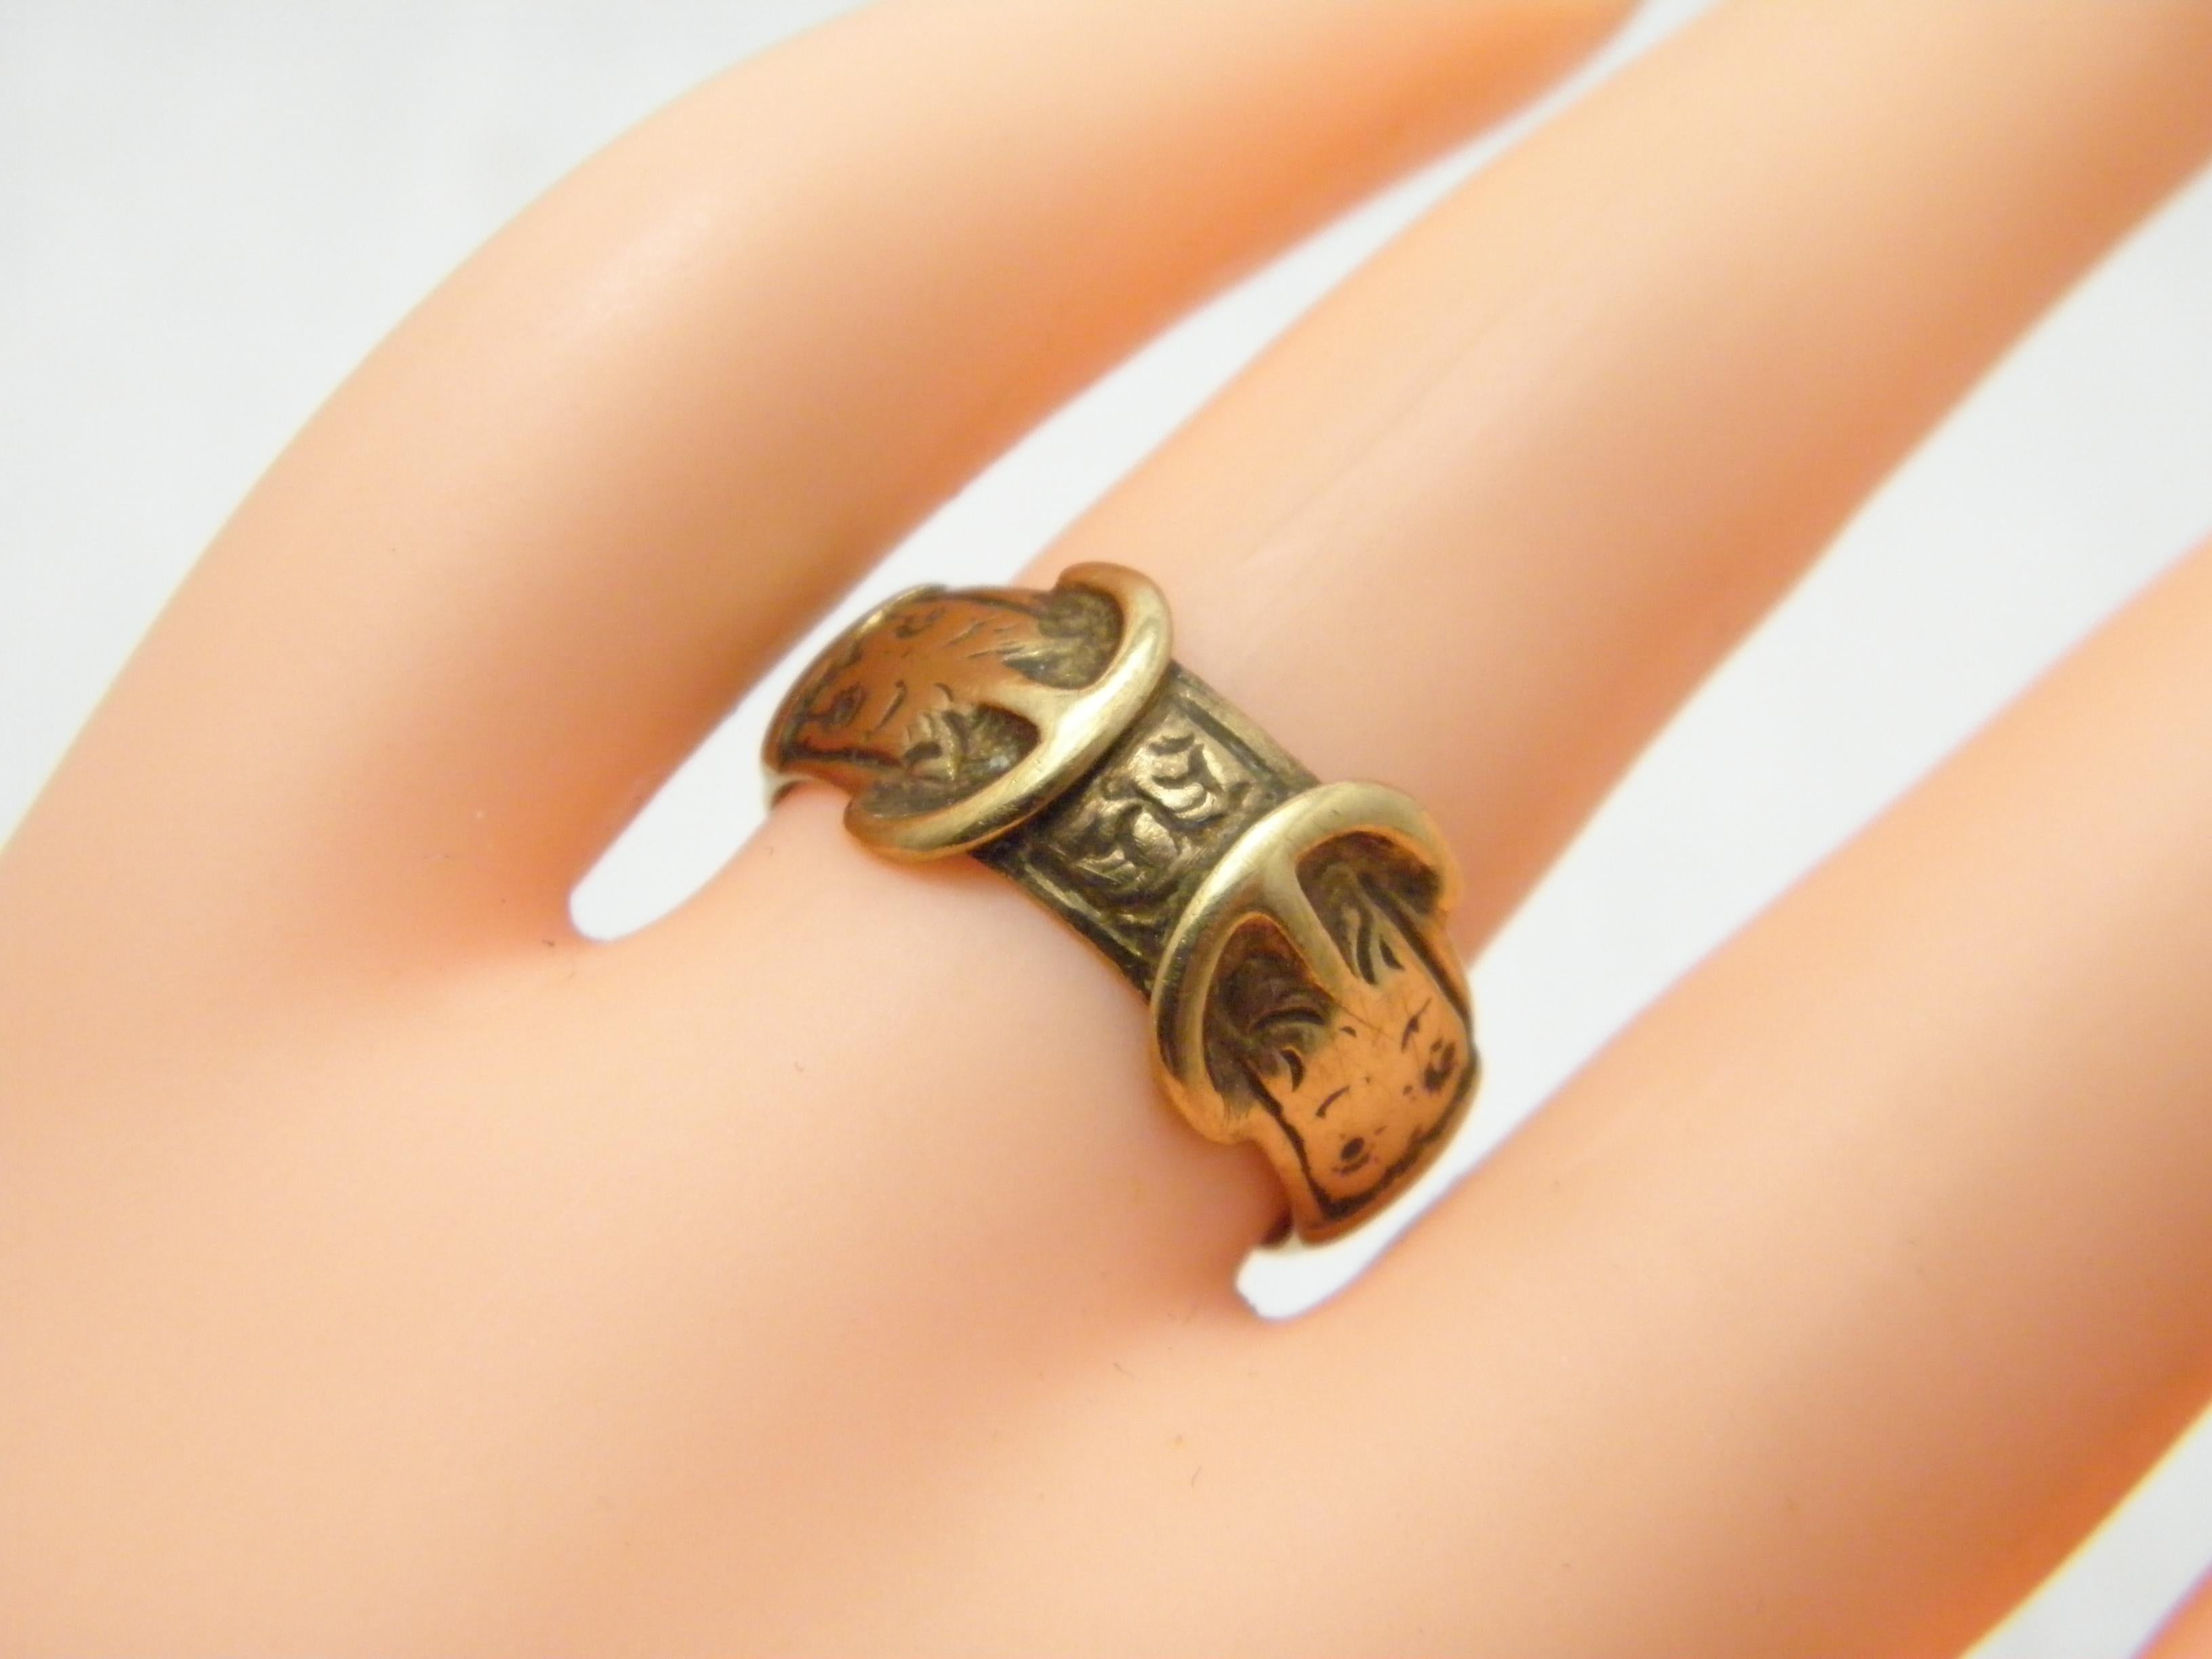 If you have landed on this page then you have an eye for beauty.

On offer is this gorgeous

9CT ROSE GOLD HEAVY BUCKLE BAND SIGNET RING

DETAILS
Material: 9ct 375/000 Rosey Yellow Gold
This ring has a good thick shank hence ideal if resizing